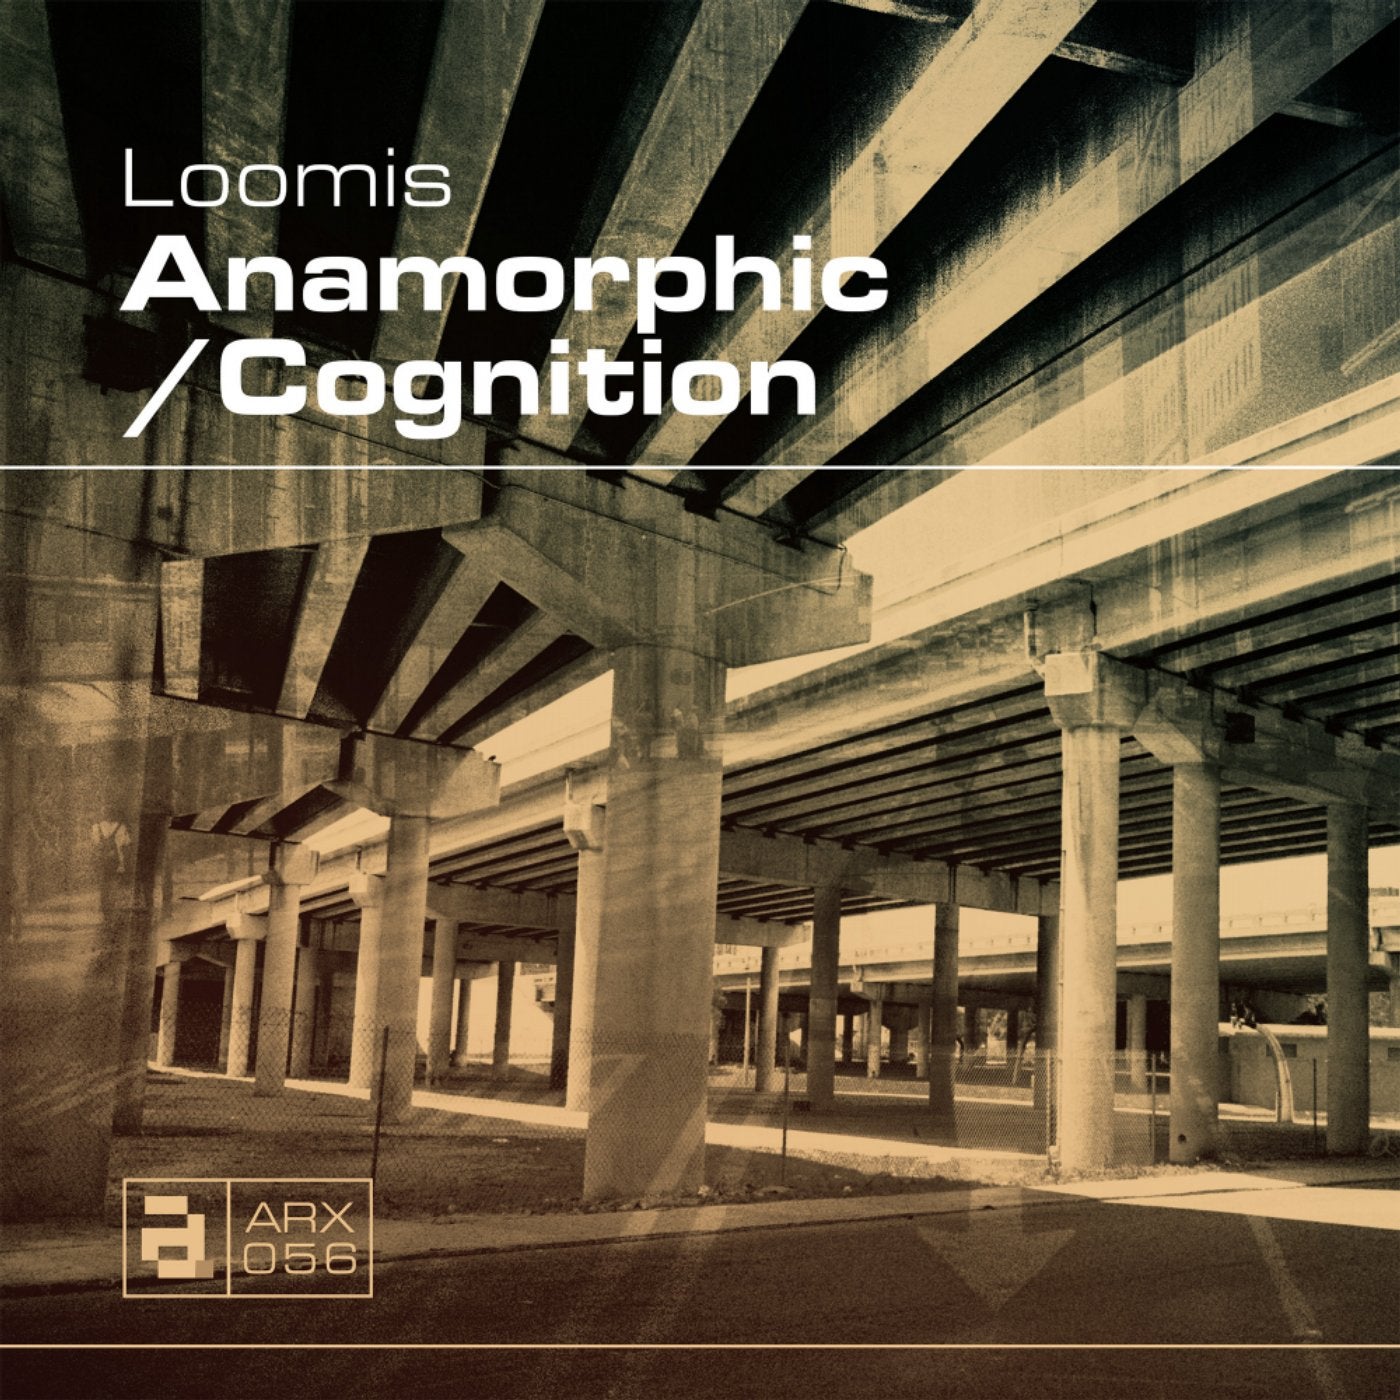 Anamorphic / Cognition